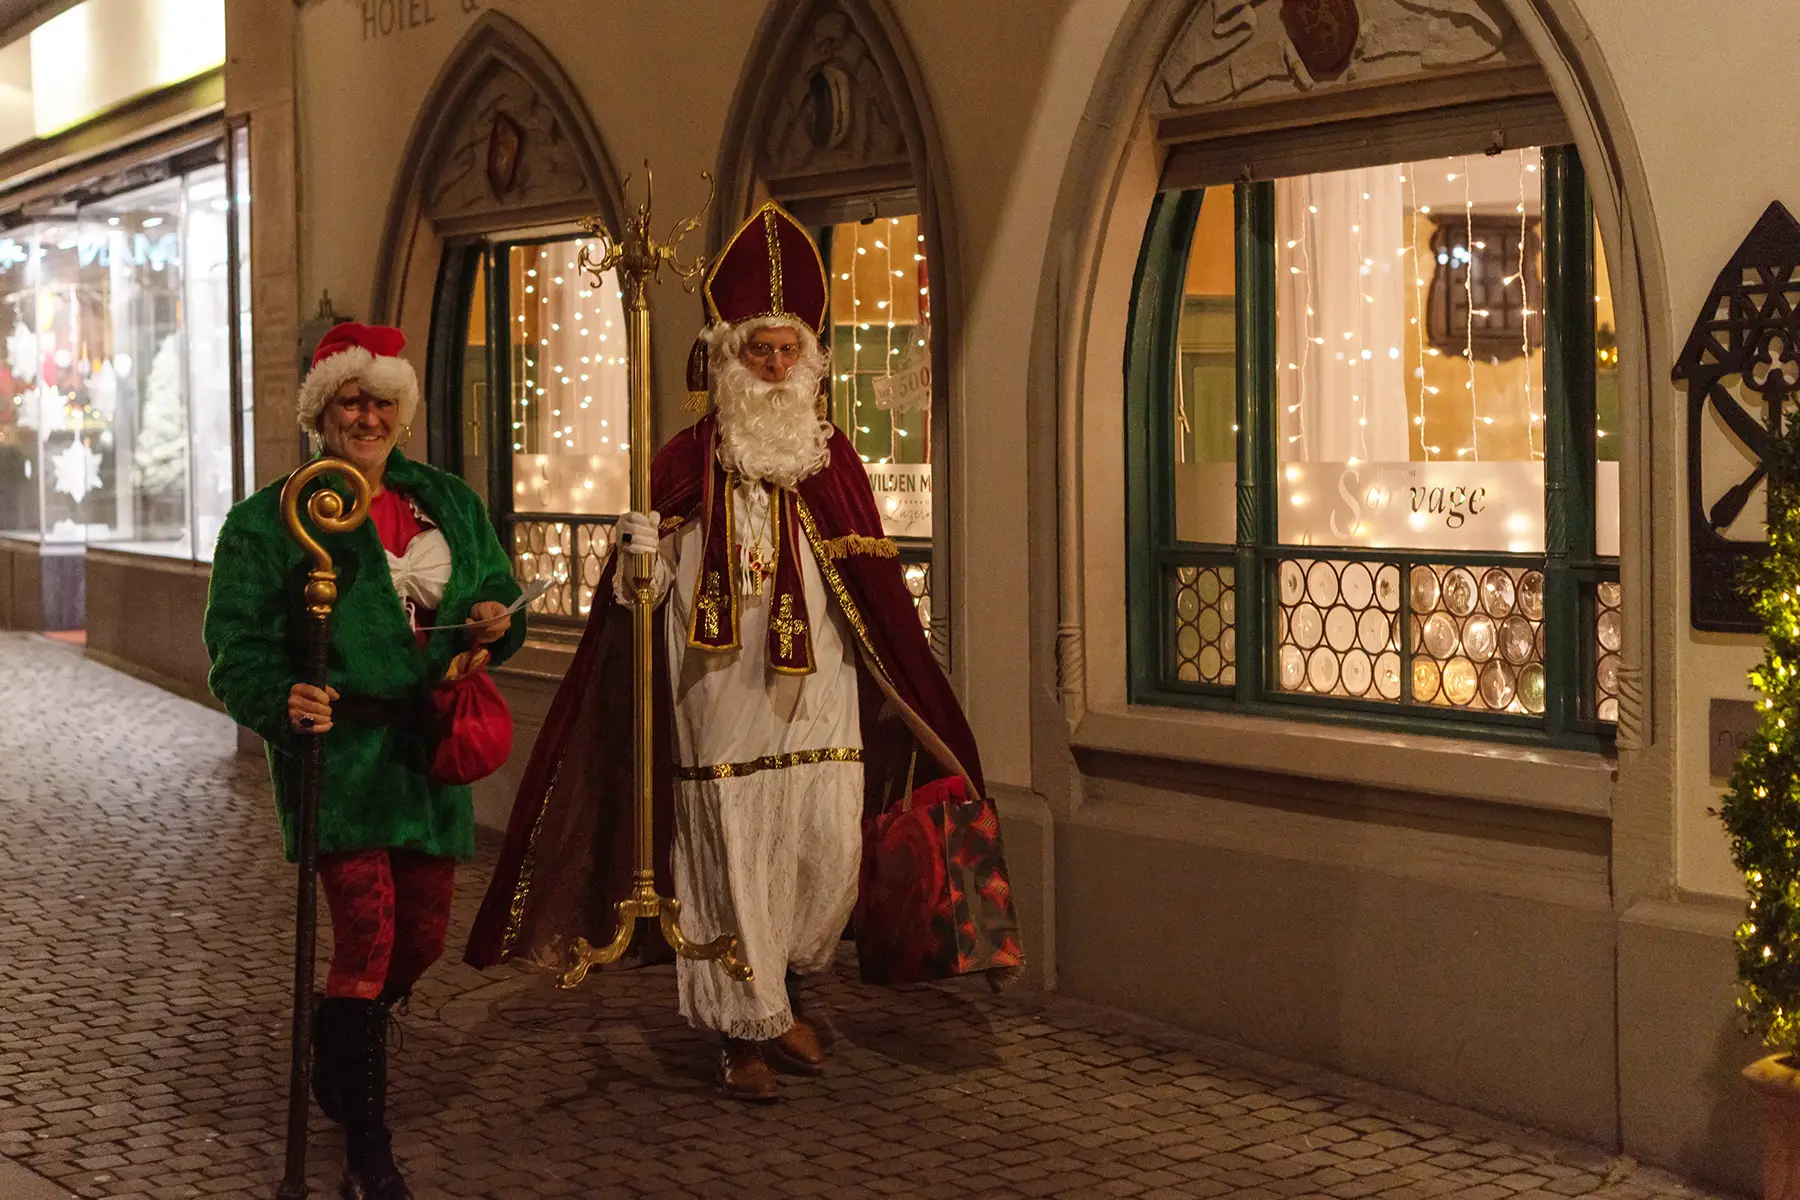 A Swiss Samichlaus roams the streets of Lucerne